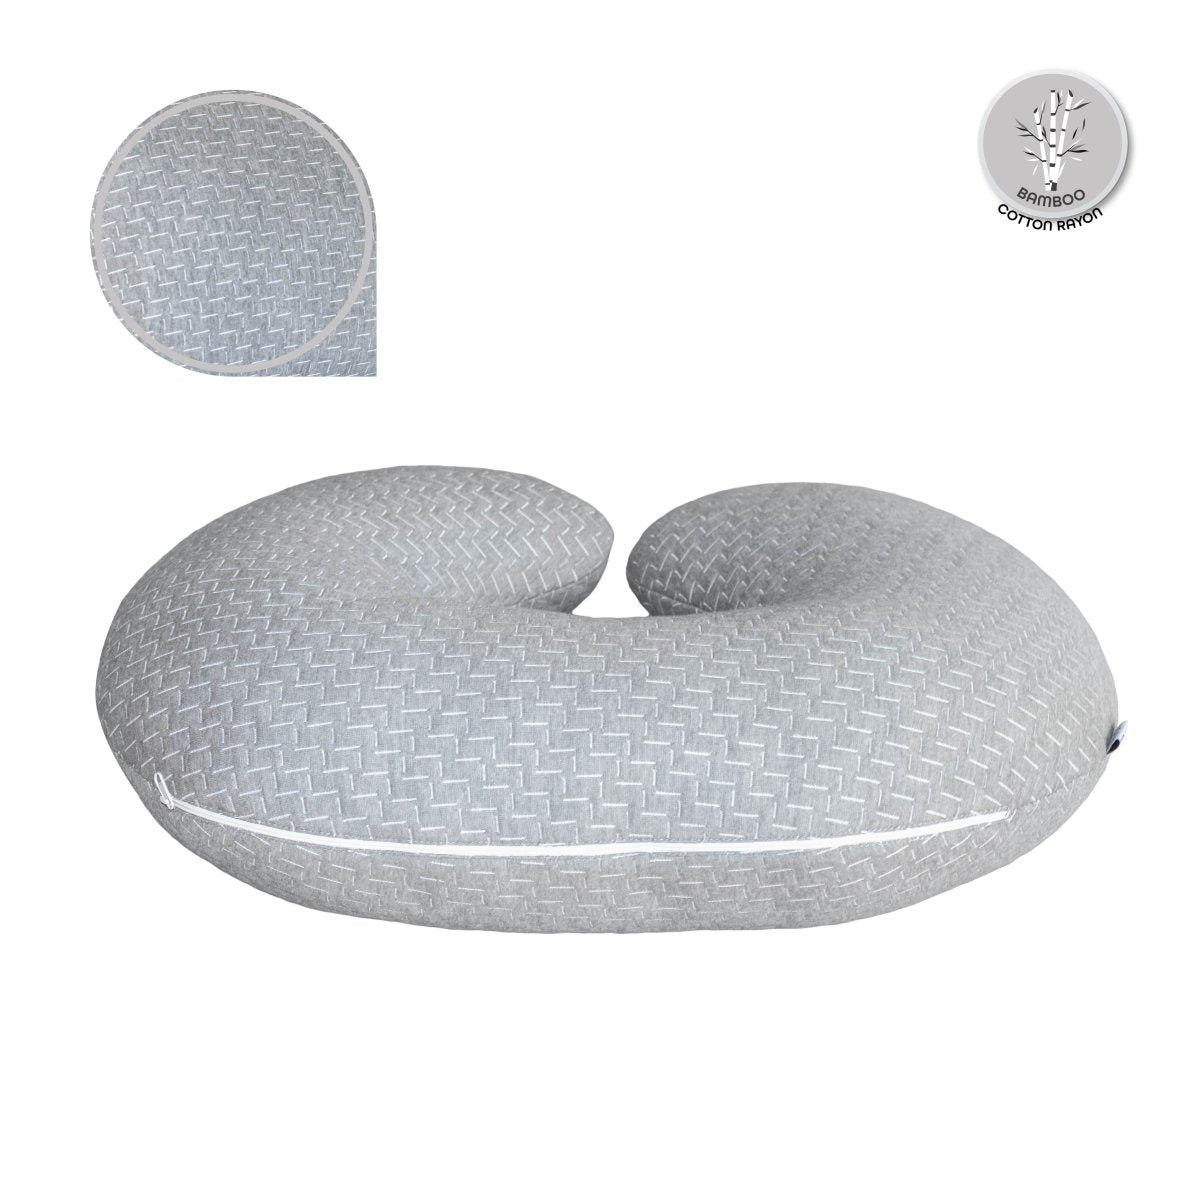 Moon Feeding Pillow with Bamboo Rayon Maternity Accessories Grey - MNSFPMT04